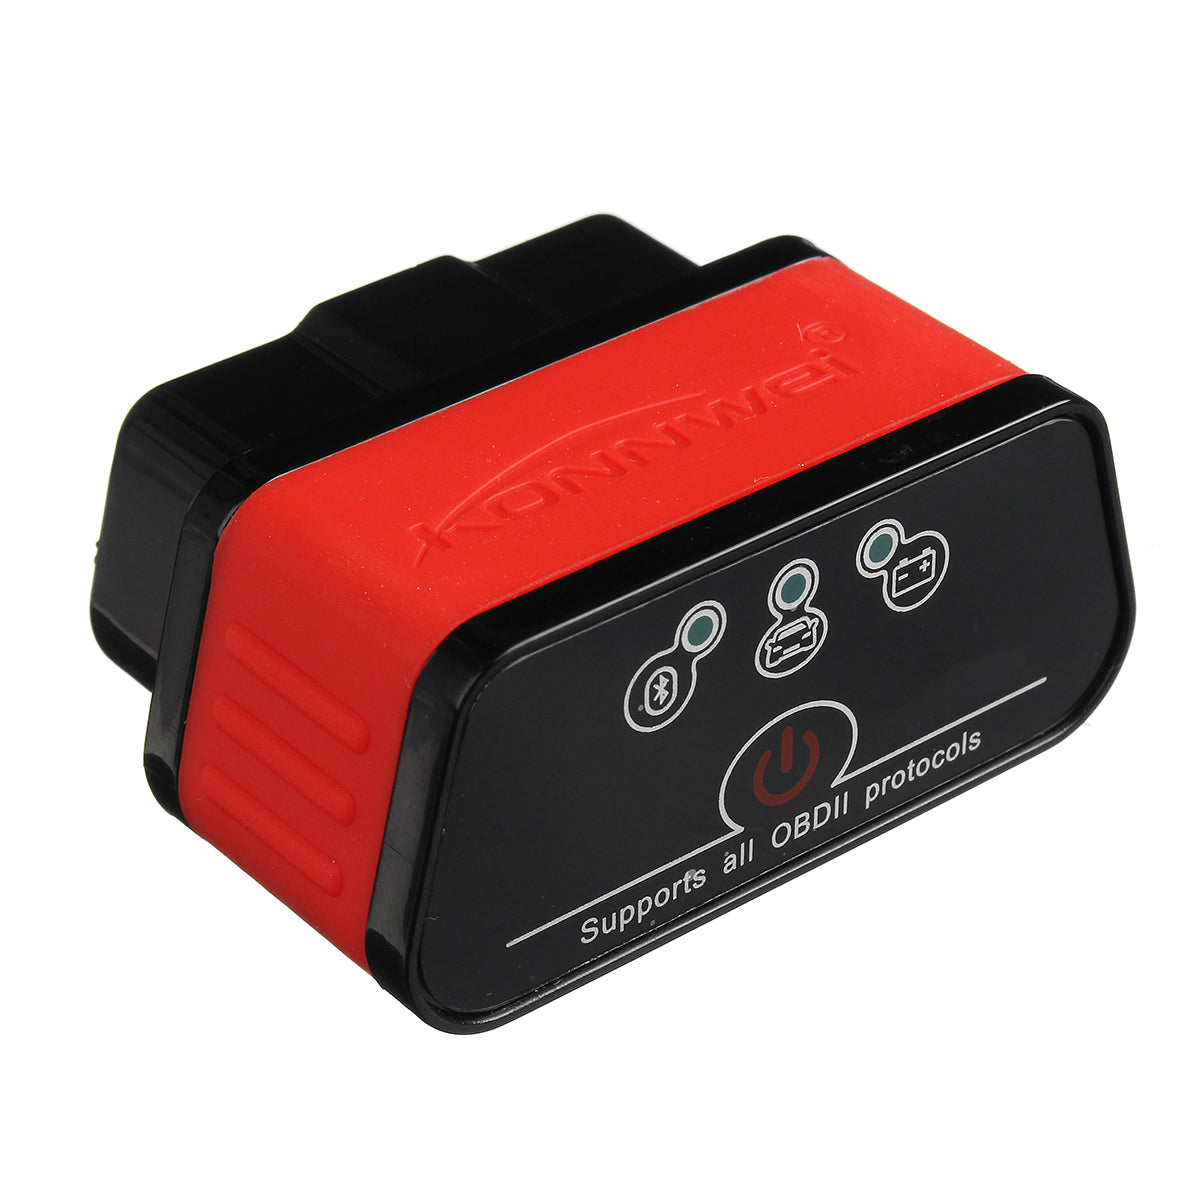 KONNWEI KW903 bluetooth ELM327 OBD2 Car Scan Tool Diagnostic Scanner Engine Code Reader for Android Phone - Auto GoShop